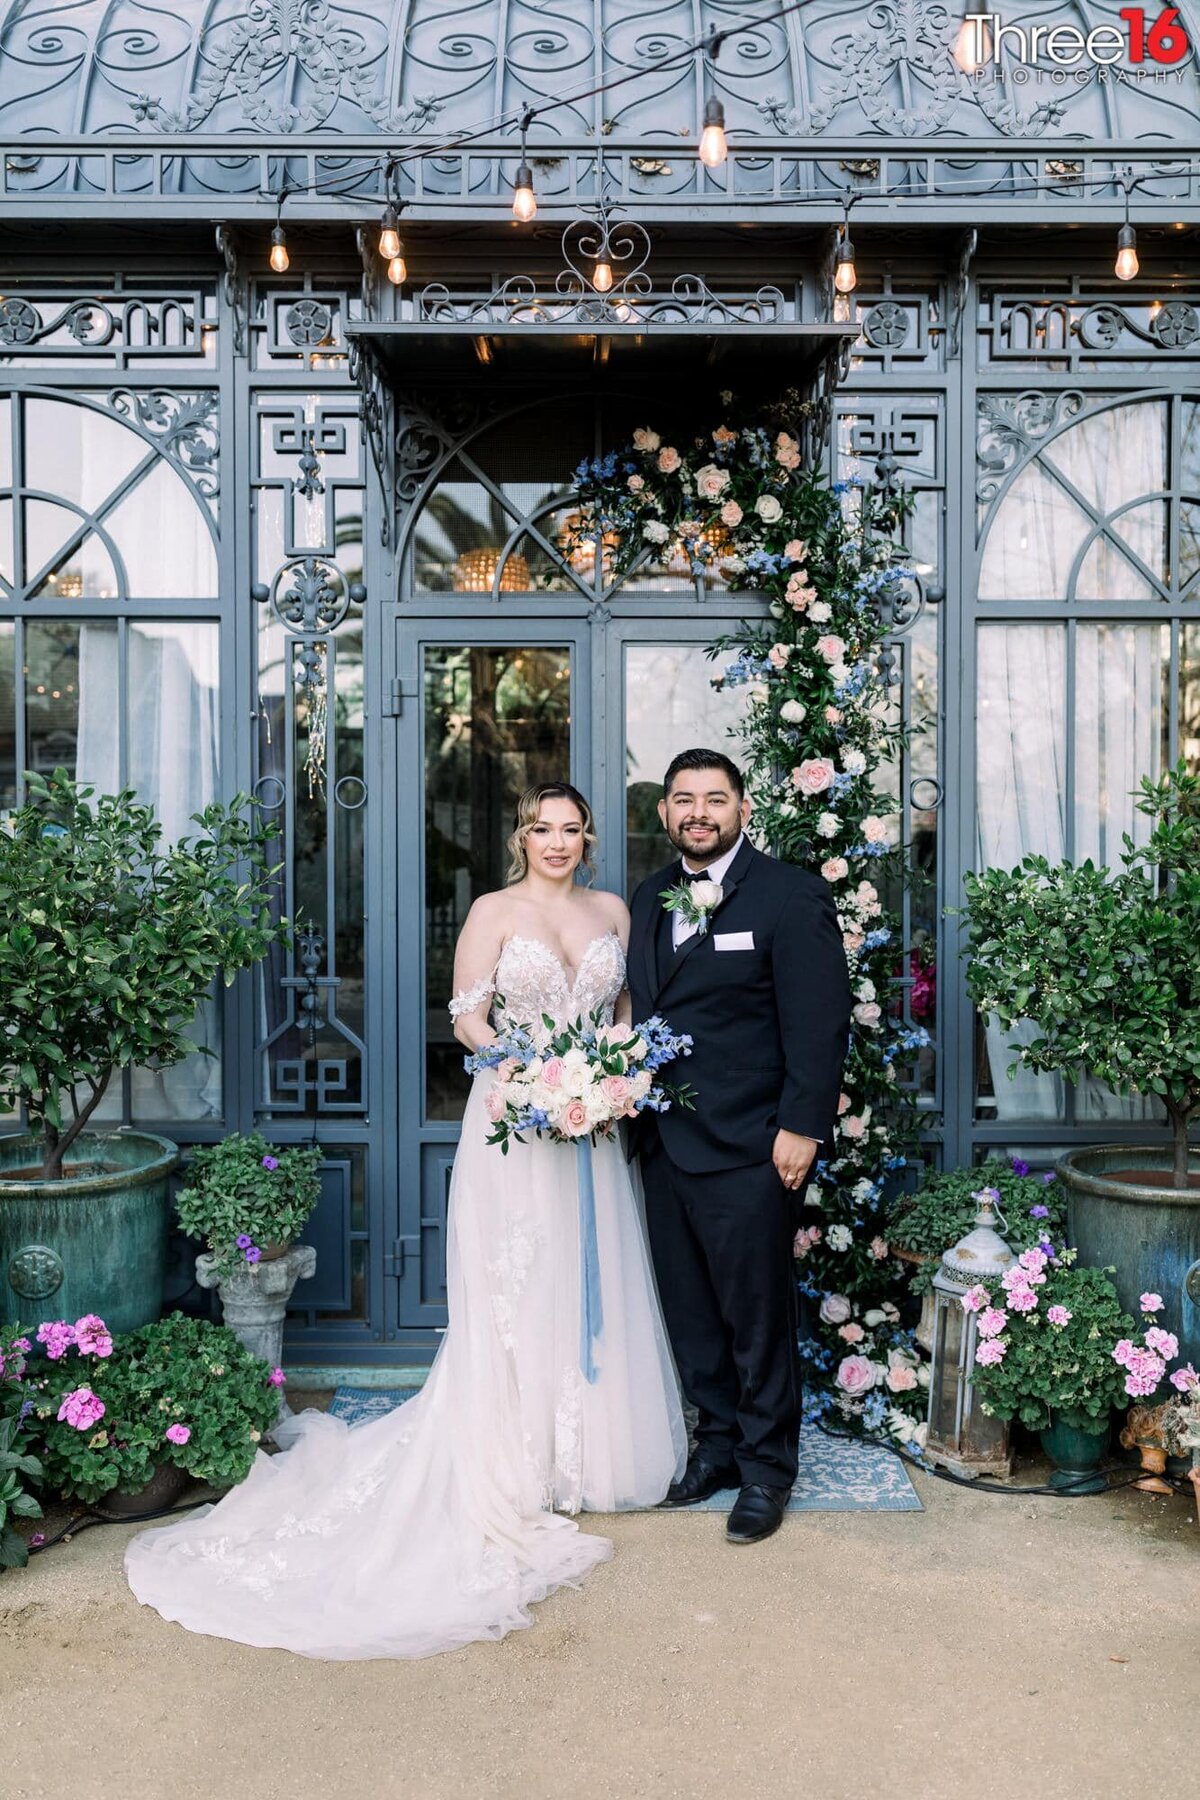 Bride and Groom pose for photos at the beautiful Lavender Marketplace & Workshops